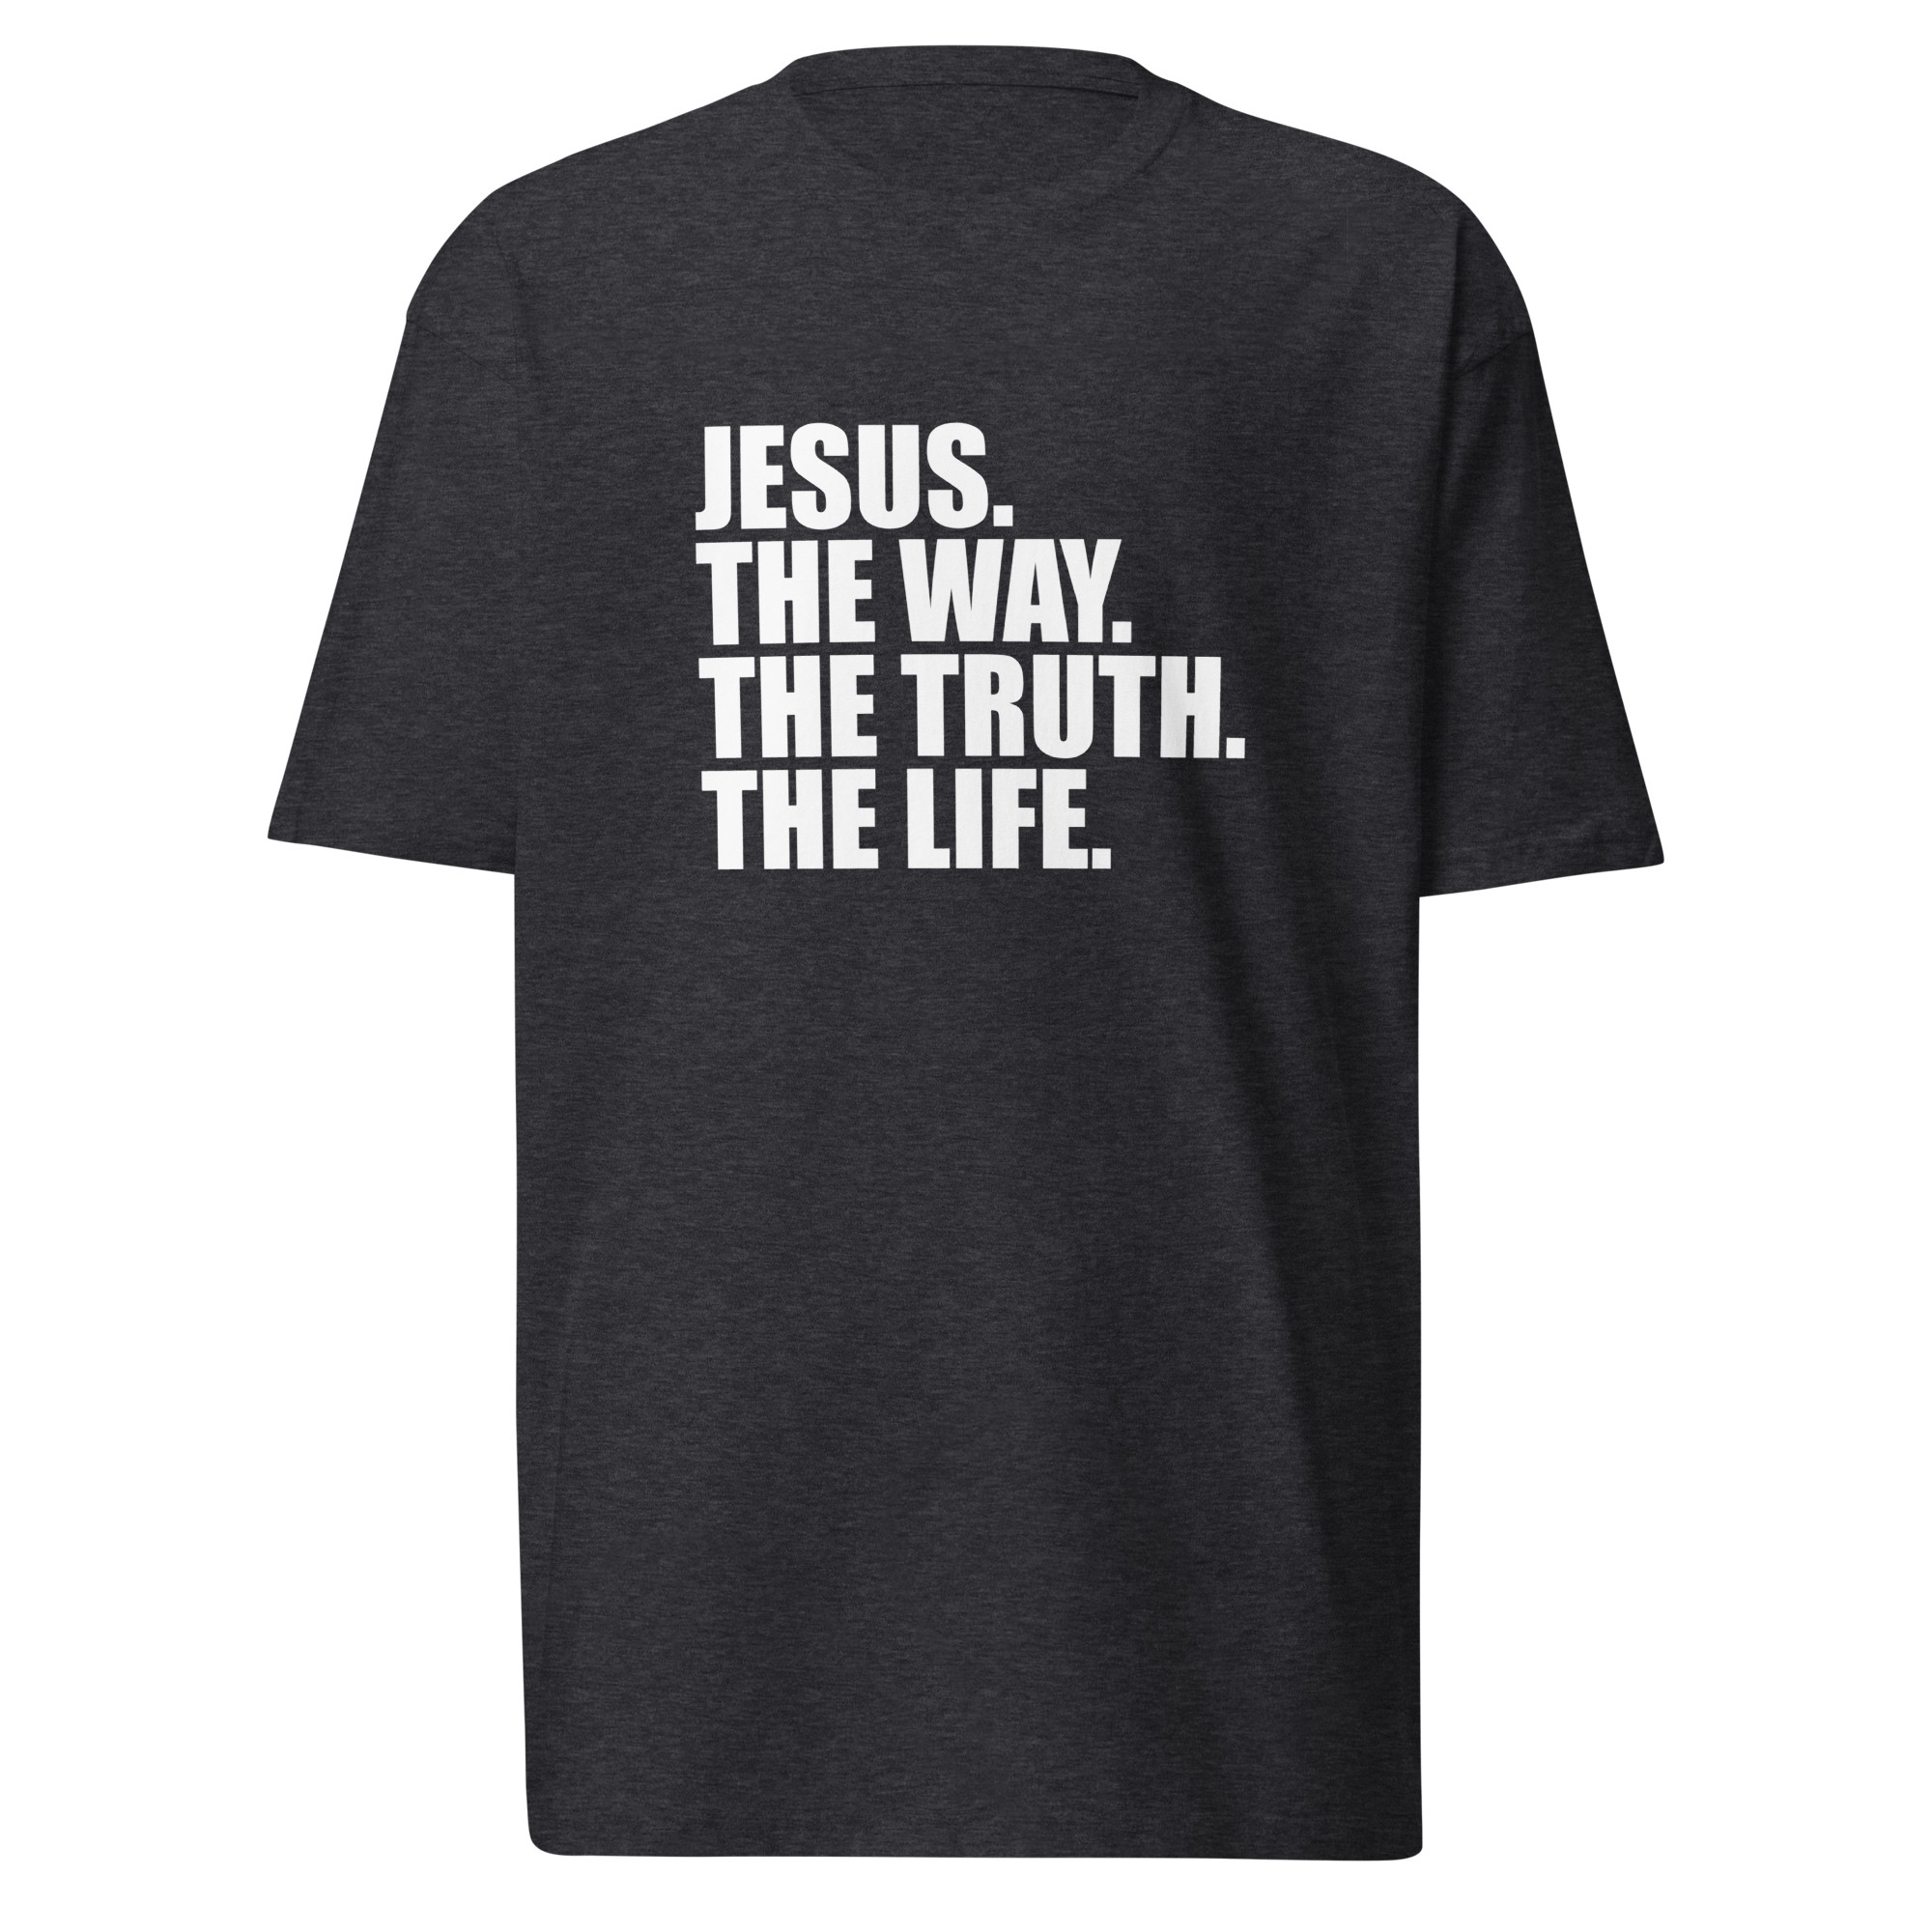 The Way. The Truth. The Life. T-Shirt - Charcoal Heather / M